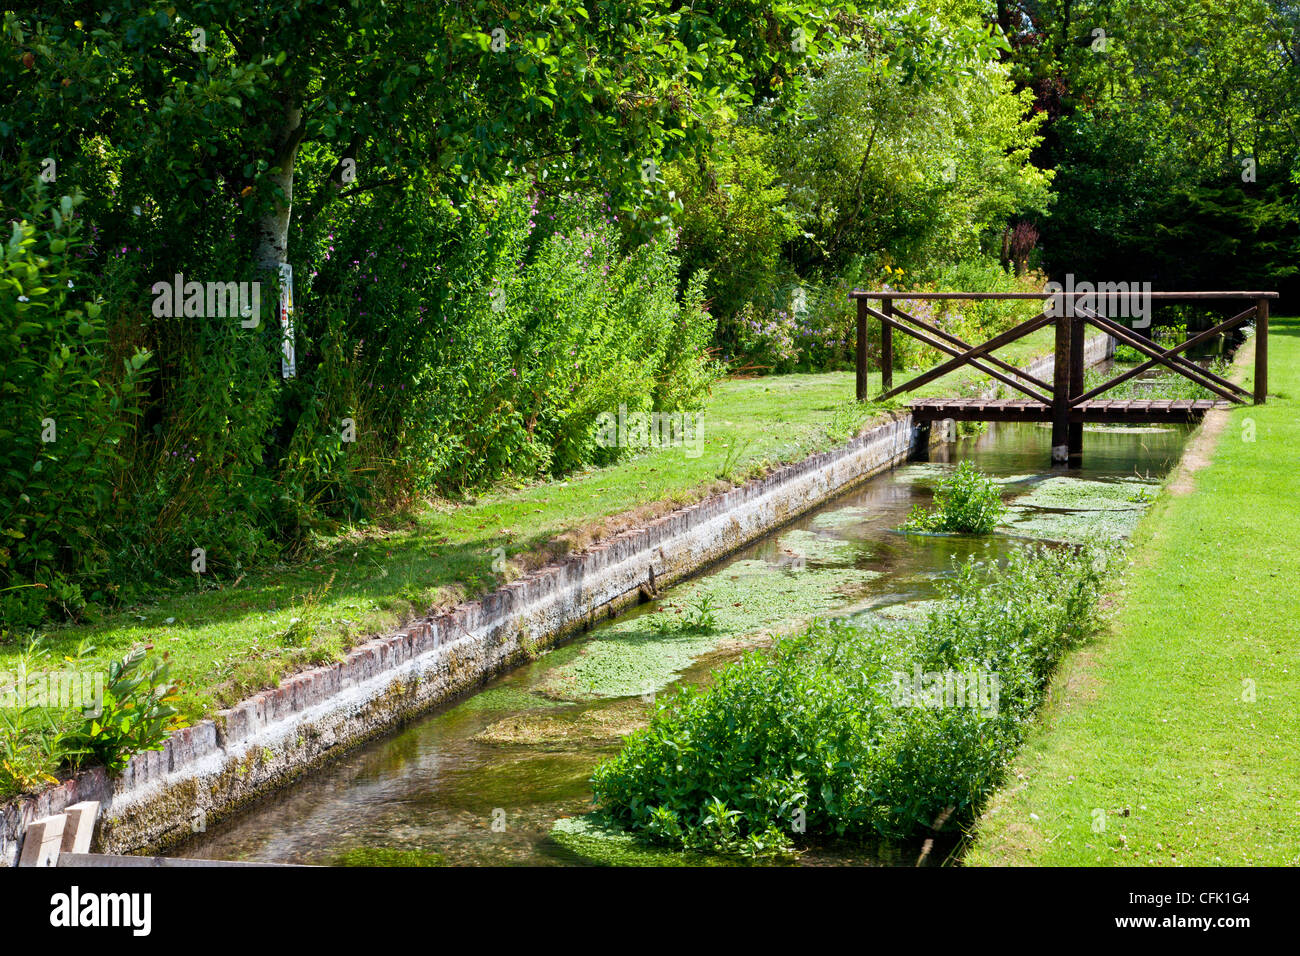 An ornamental rill and wooden footbridge in the English country garden of Littlecote Manor in Berkshire, England, UK Stock Photo